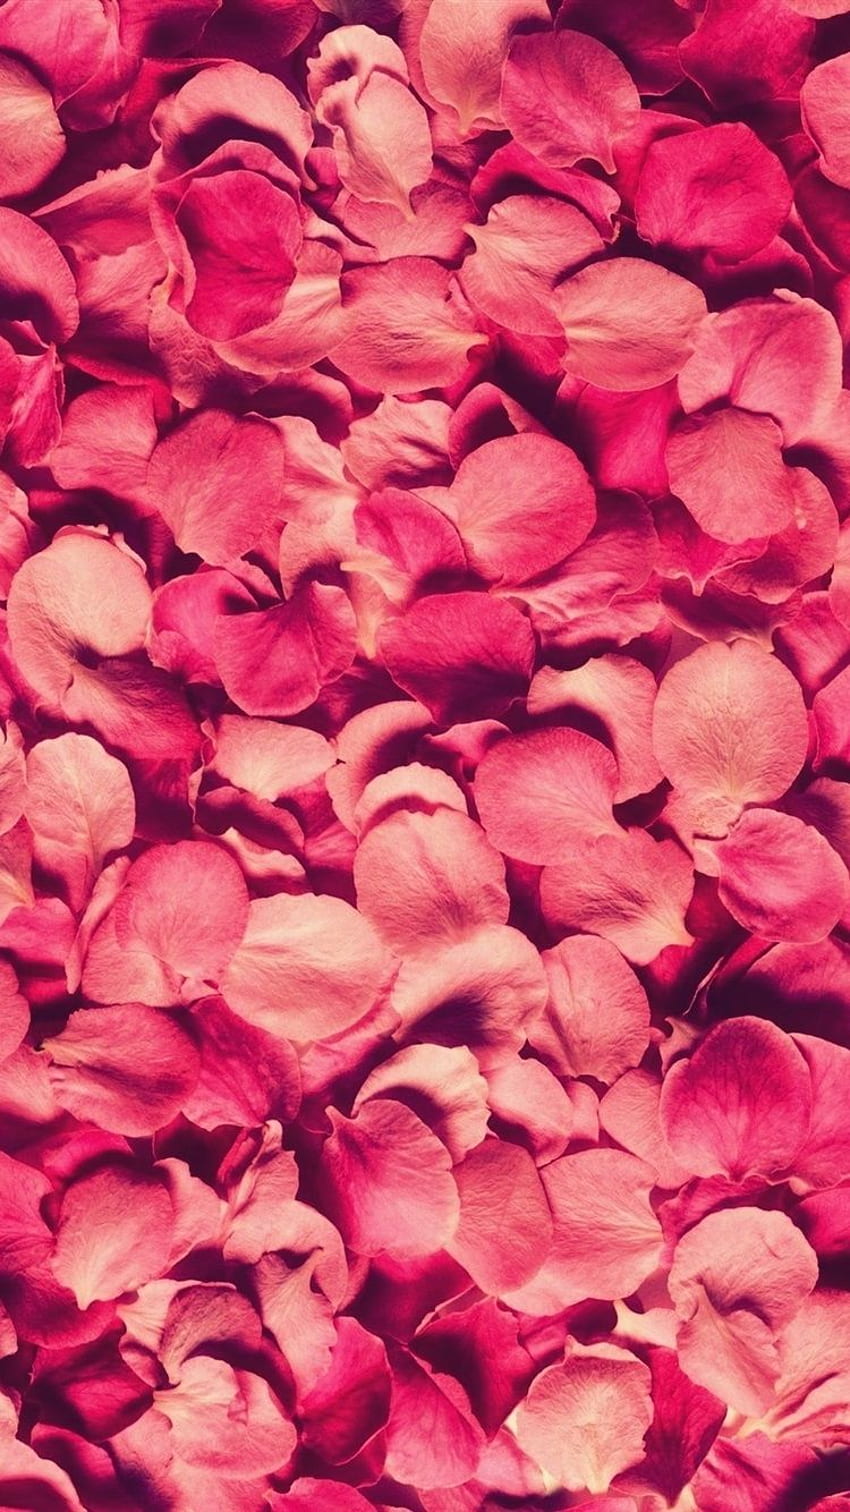 Many pink rose petals background HD phone wallpaper